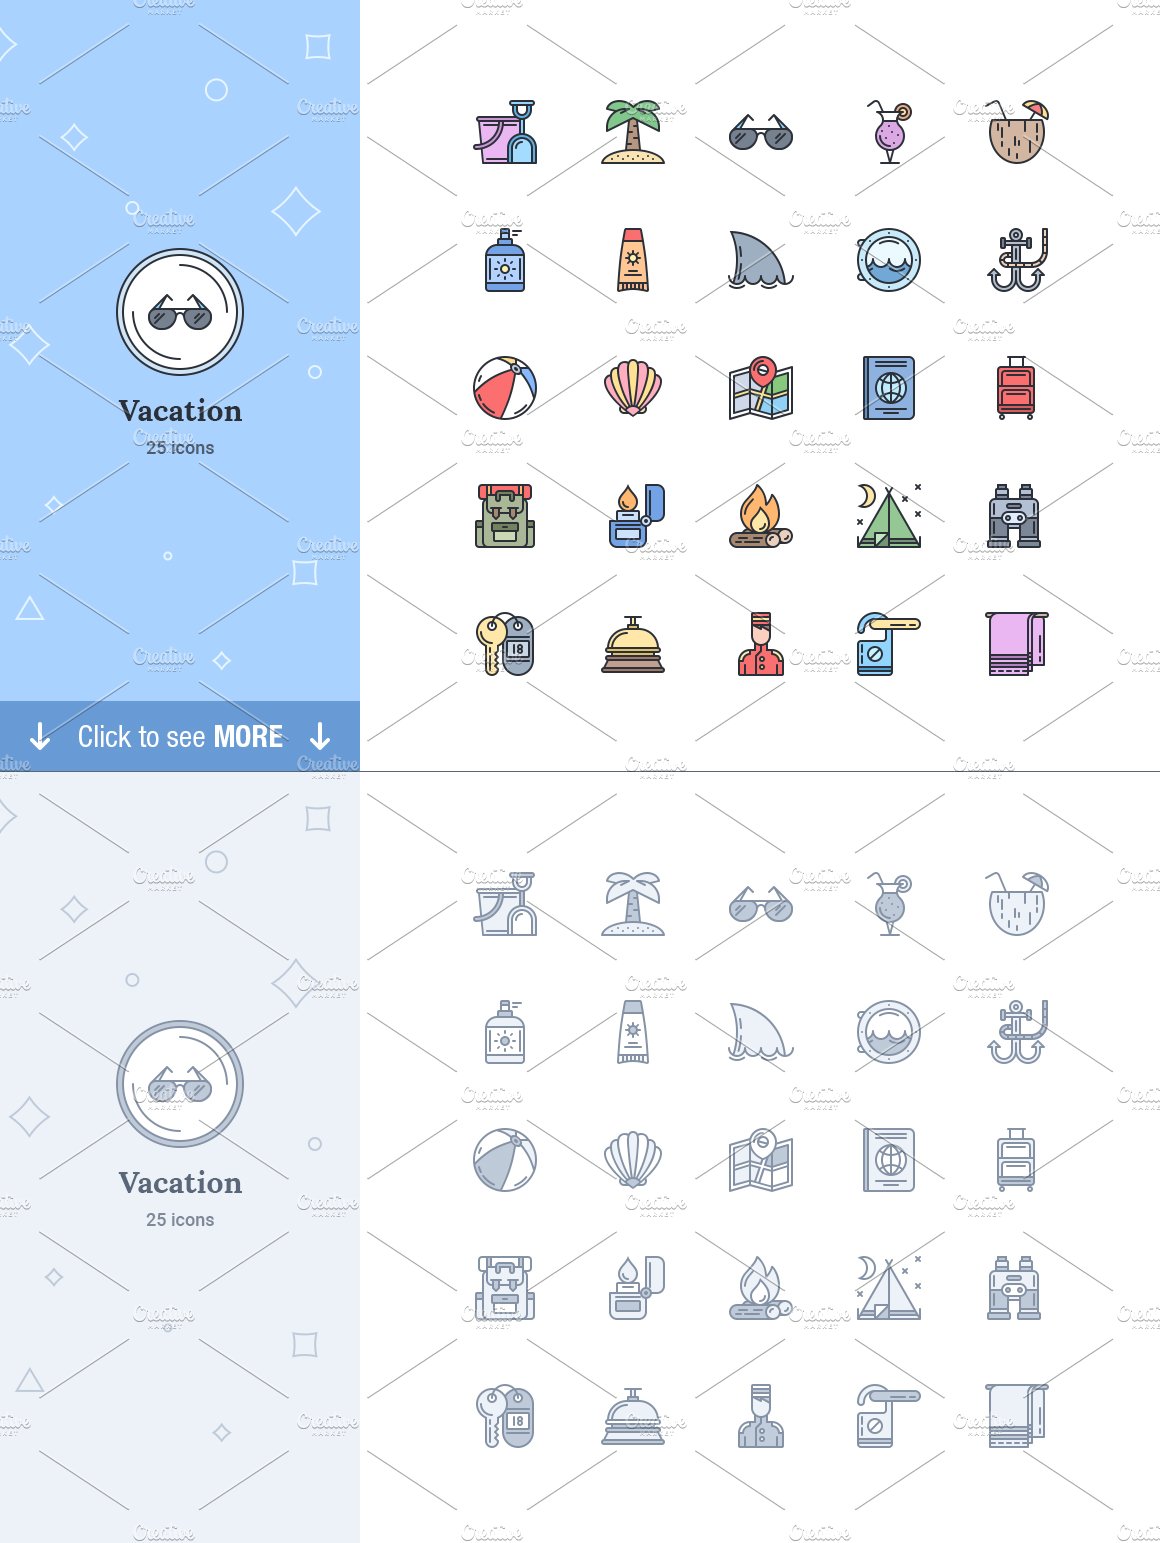 Hotel & Vacation flat landing icons preview image.